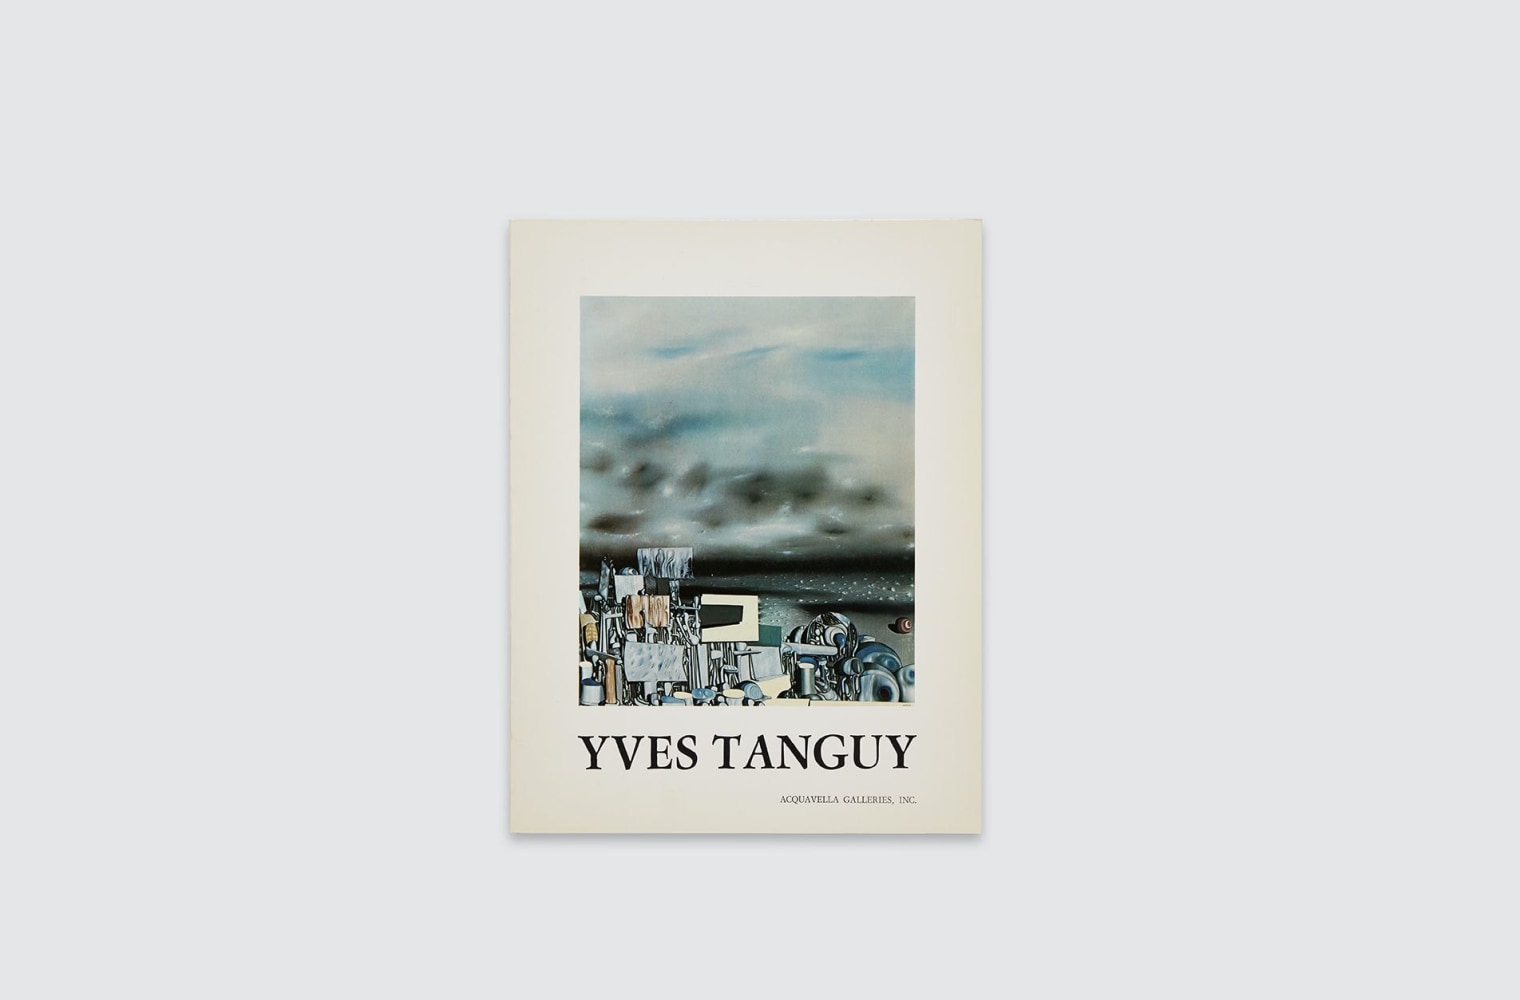 Catalogue for Yves Tanguy exhibition, fall 1974.